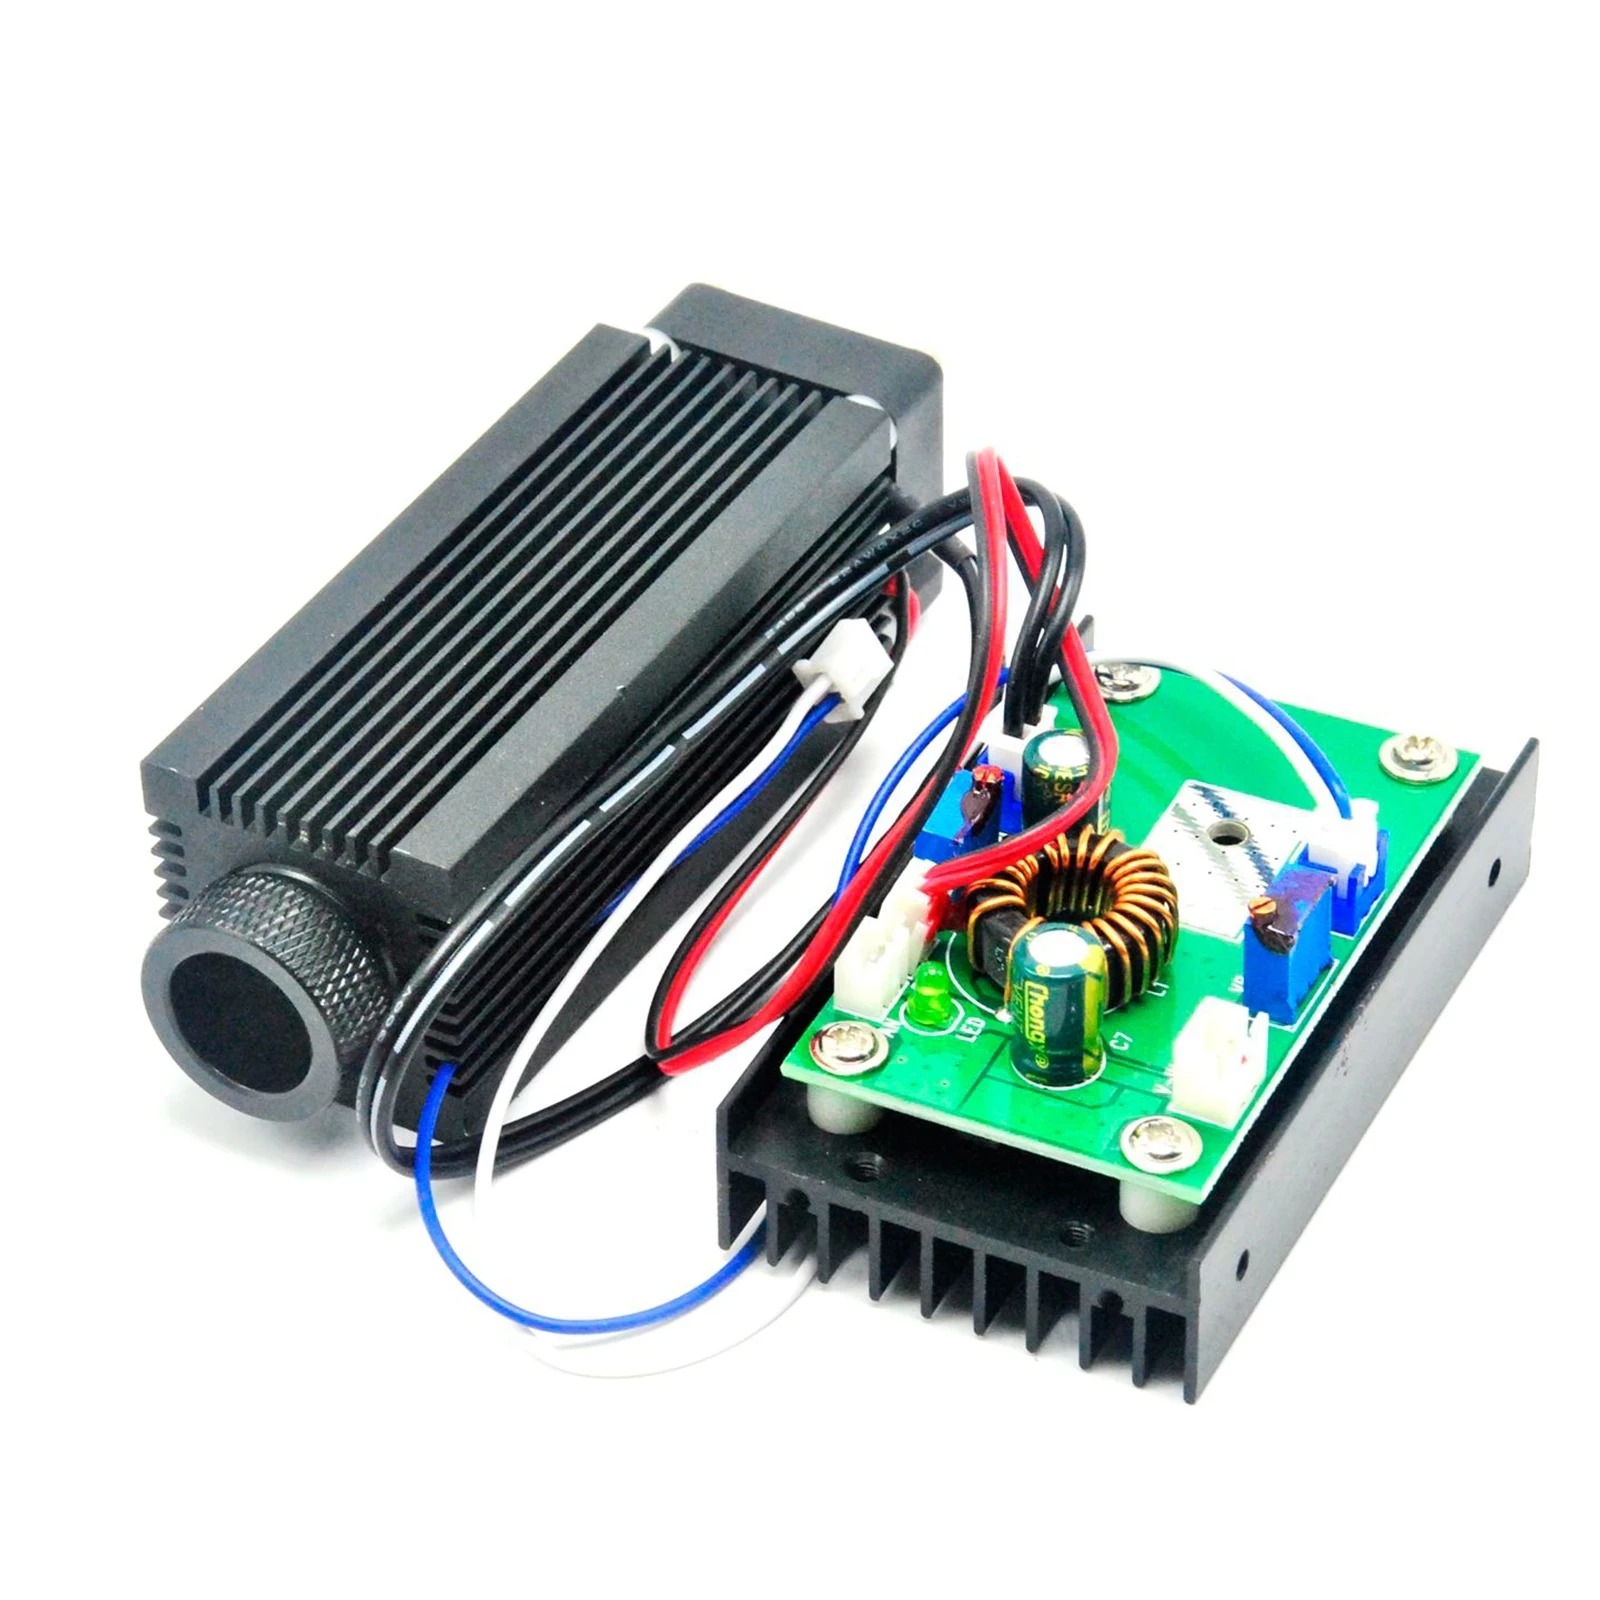 Focusable 830nm 800mW 0.8W IR Infrared Laser Diode Module 33x80mm 12v with TTL and Driver Board